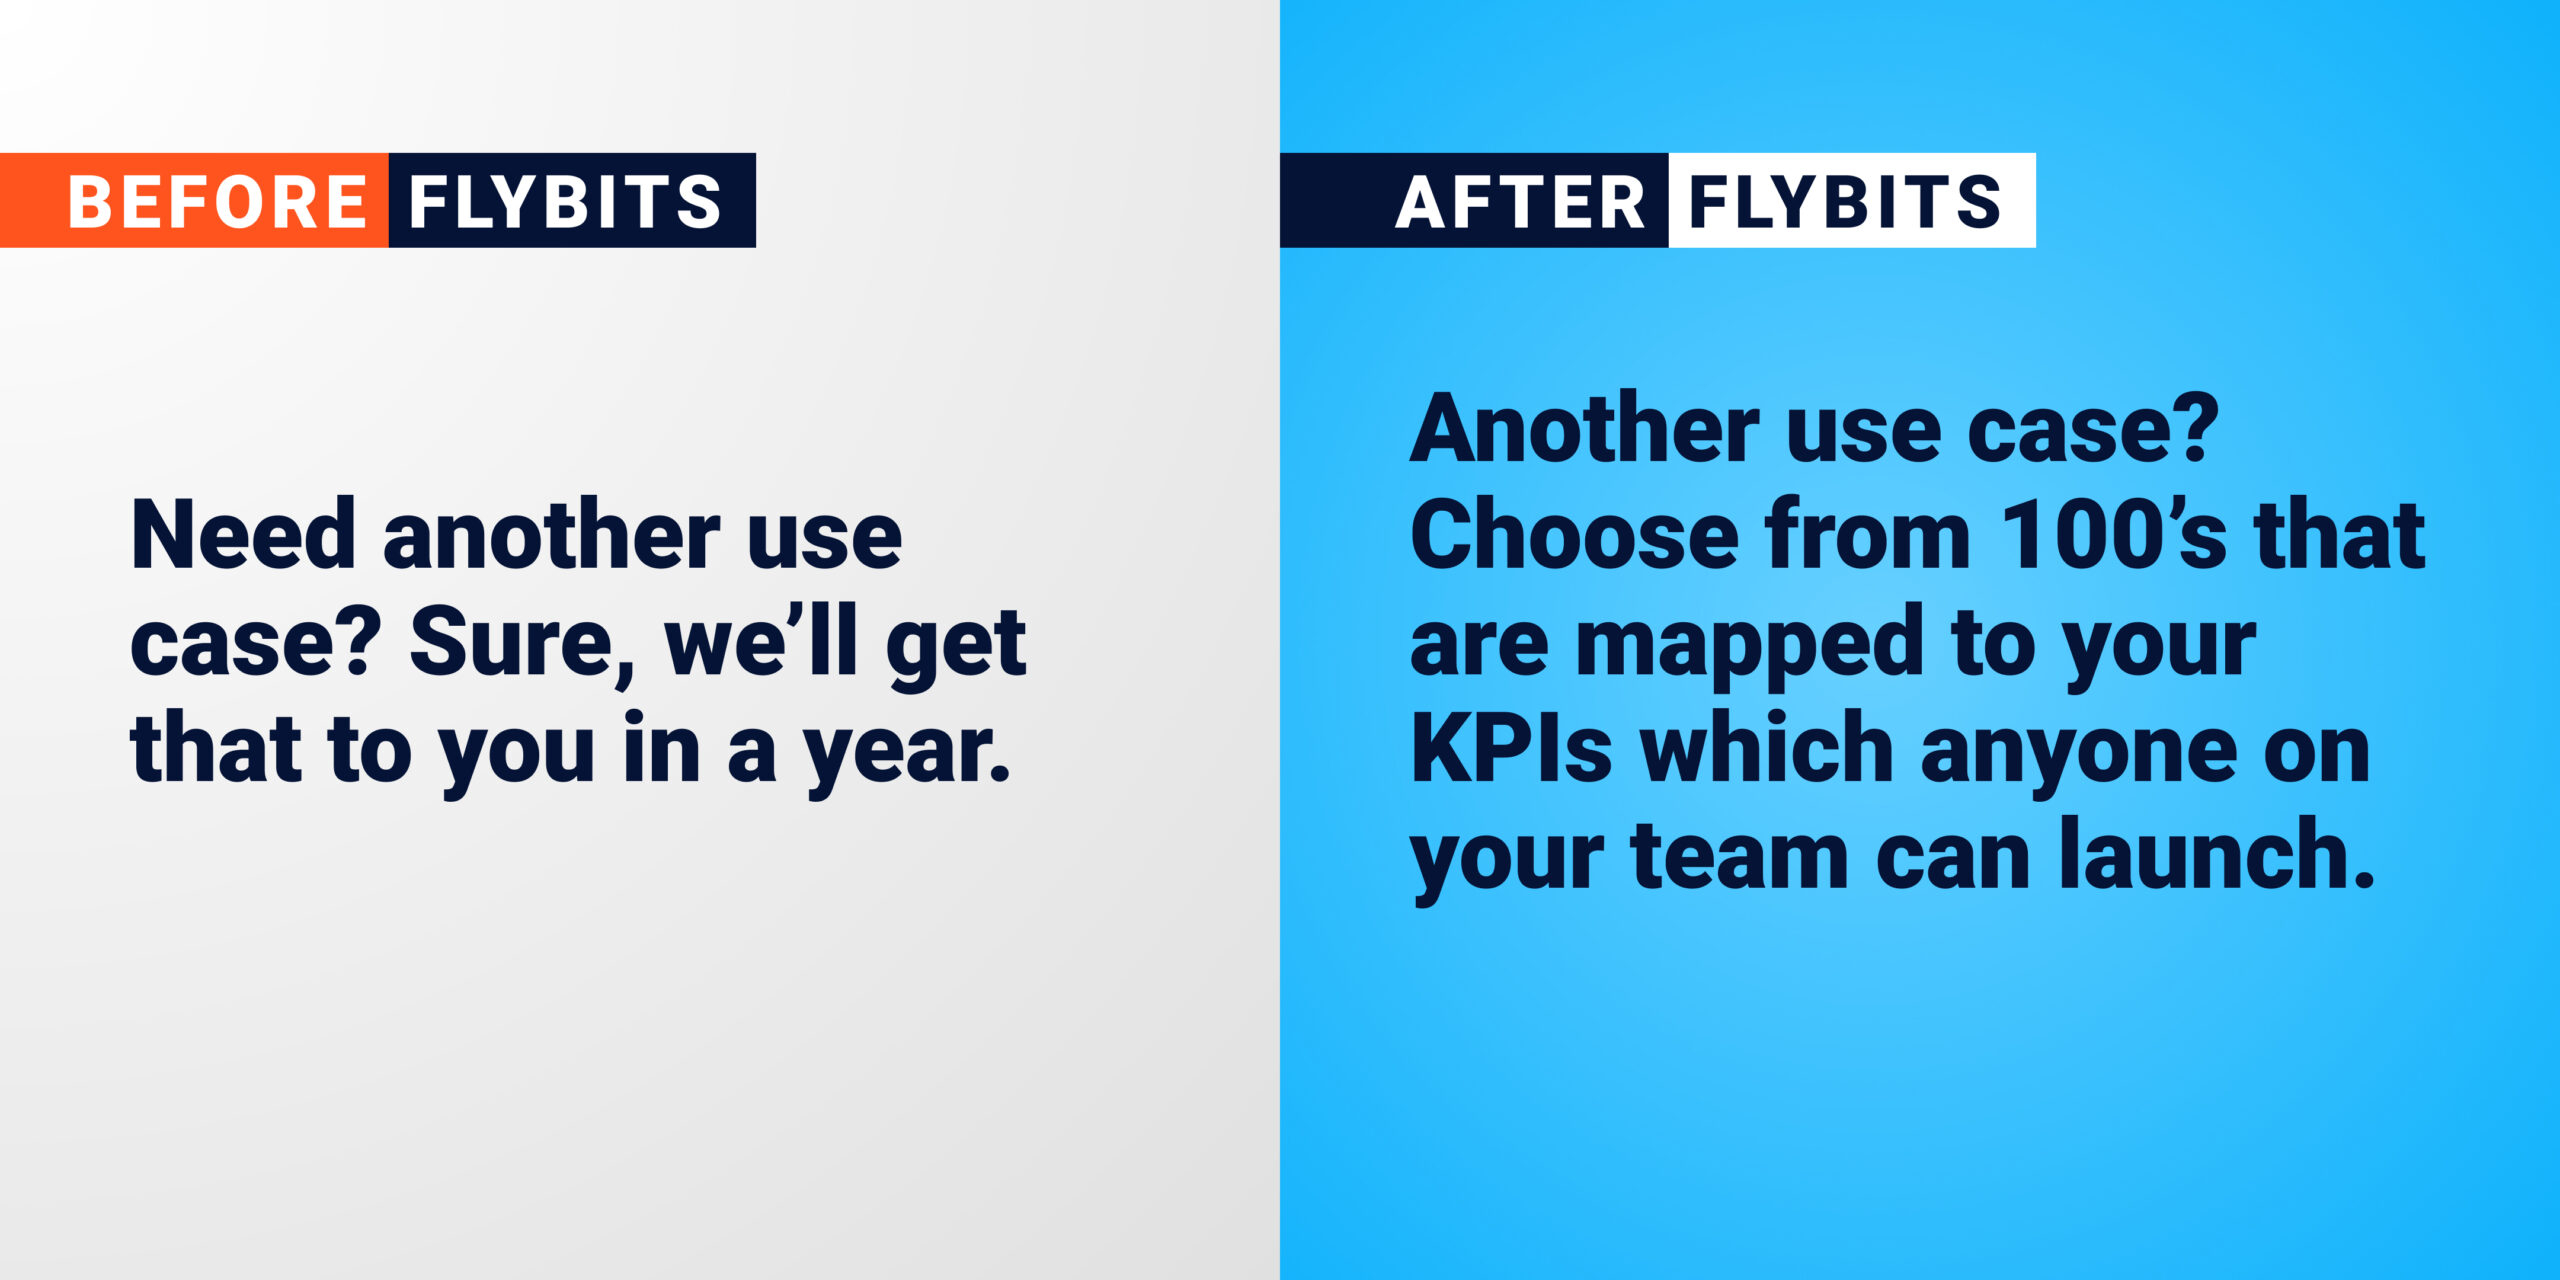 Before Flybits: Need another use case? Sure, we’ll get that to you in a year. After Flybits: Another use case? Choose from 100’s that are mapped to your KPIs which anyone on your team can launch.